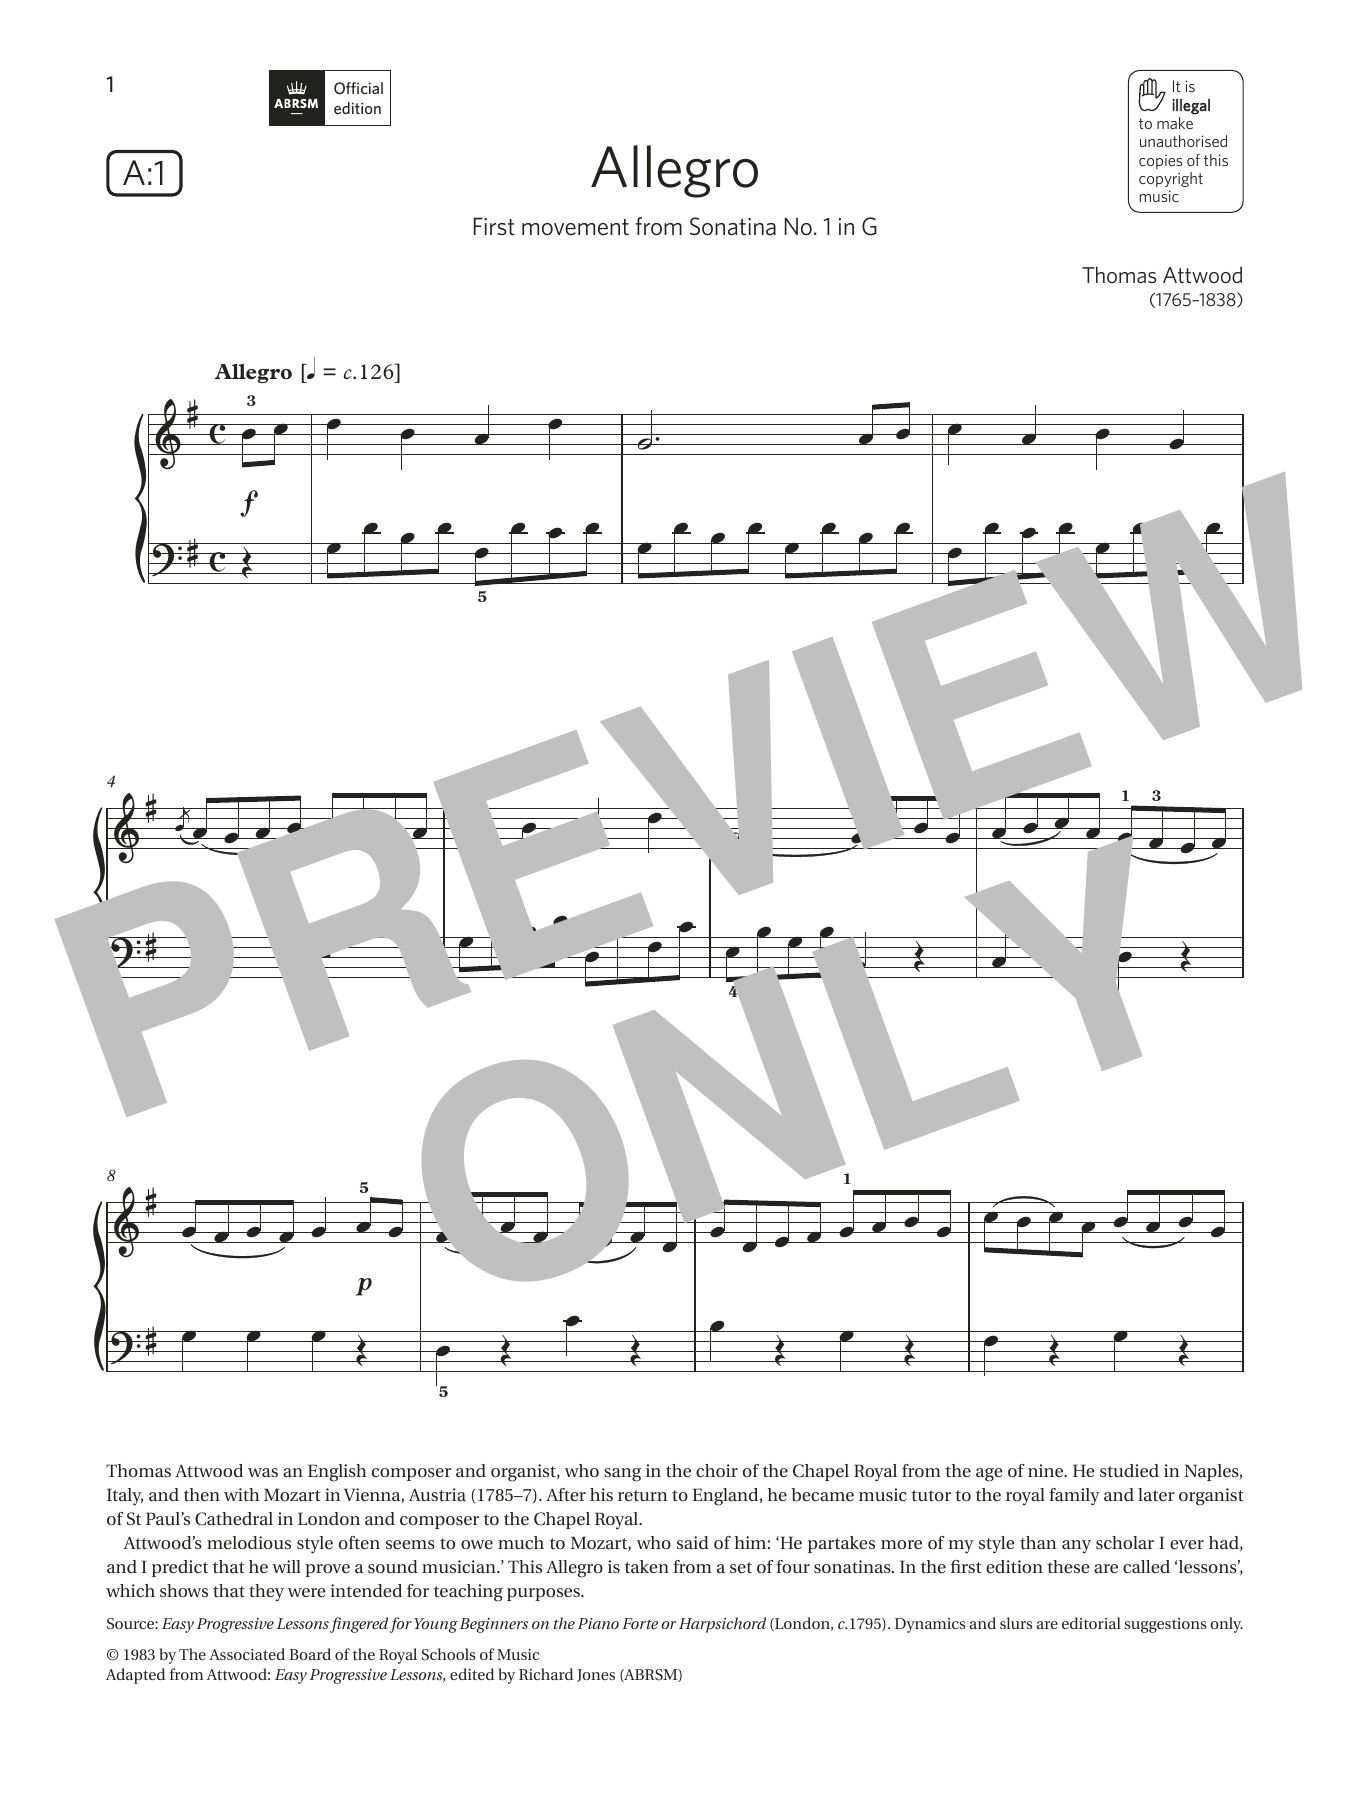 Download Thomas Attwood Allegro (Grade 2, list A1, from the ABR Sheet Music